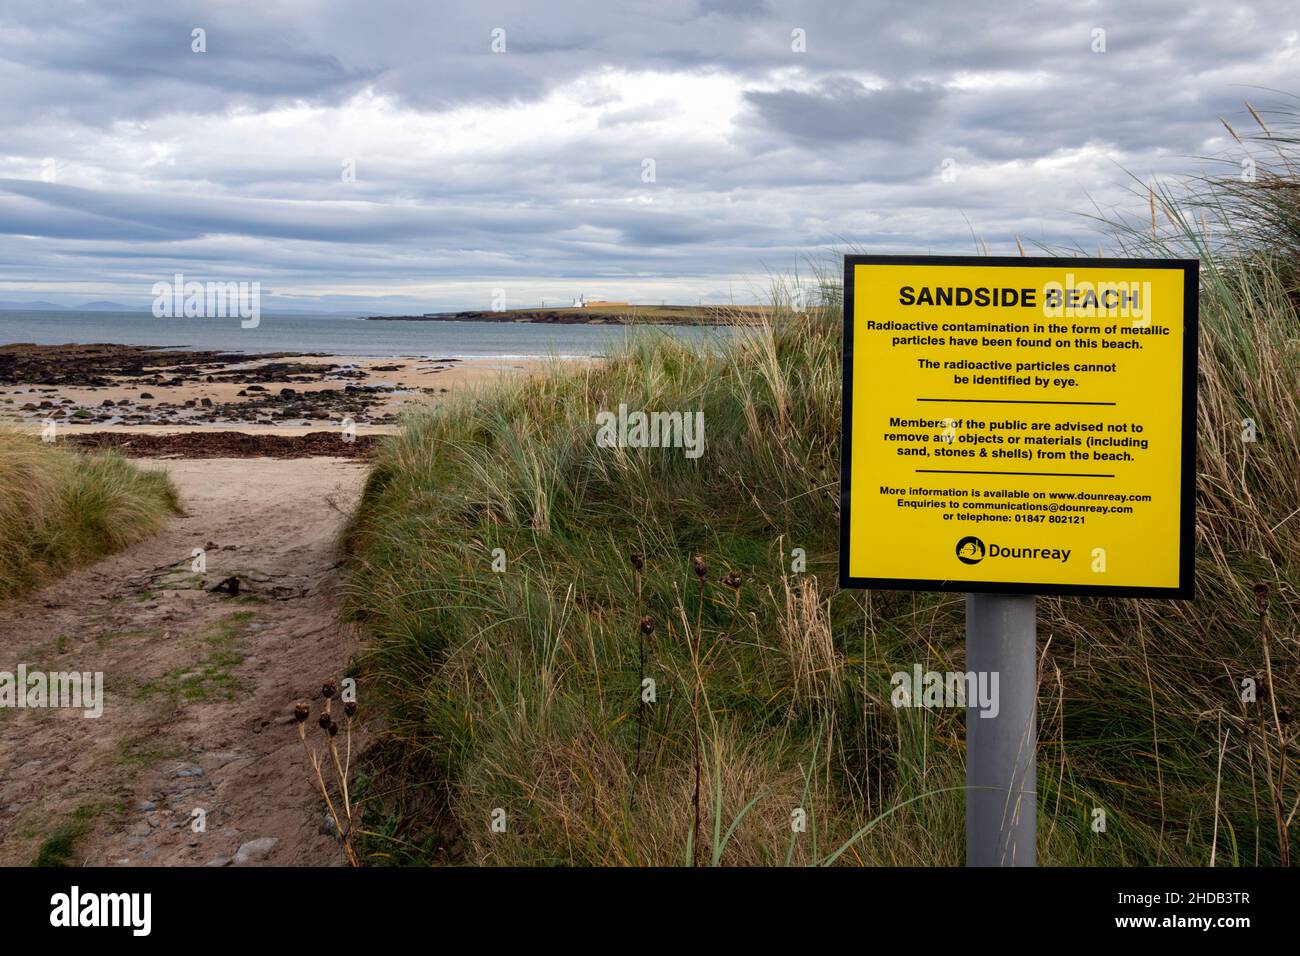 Radioactive contamination warning sign at Sandside Beach near the Vulcan Naval Nuclear Reactor Test Establishment at Dounreay in Caithness on the nort Stock Photo